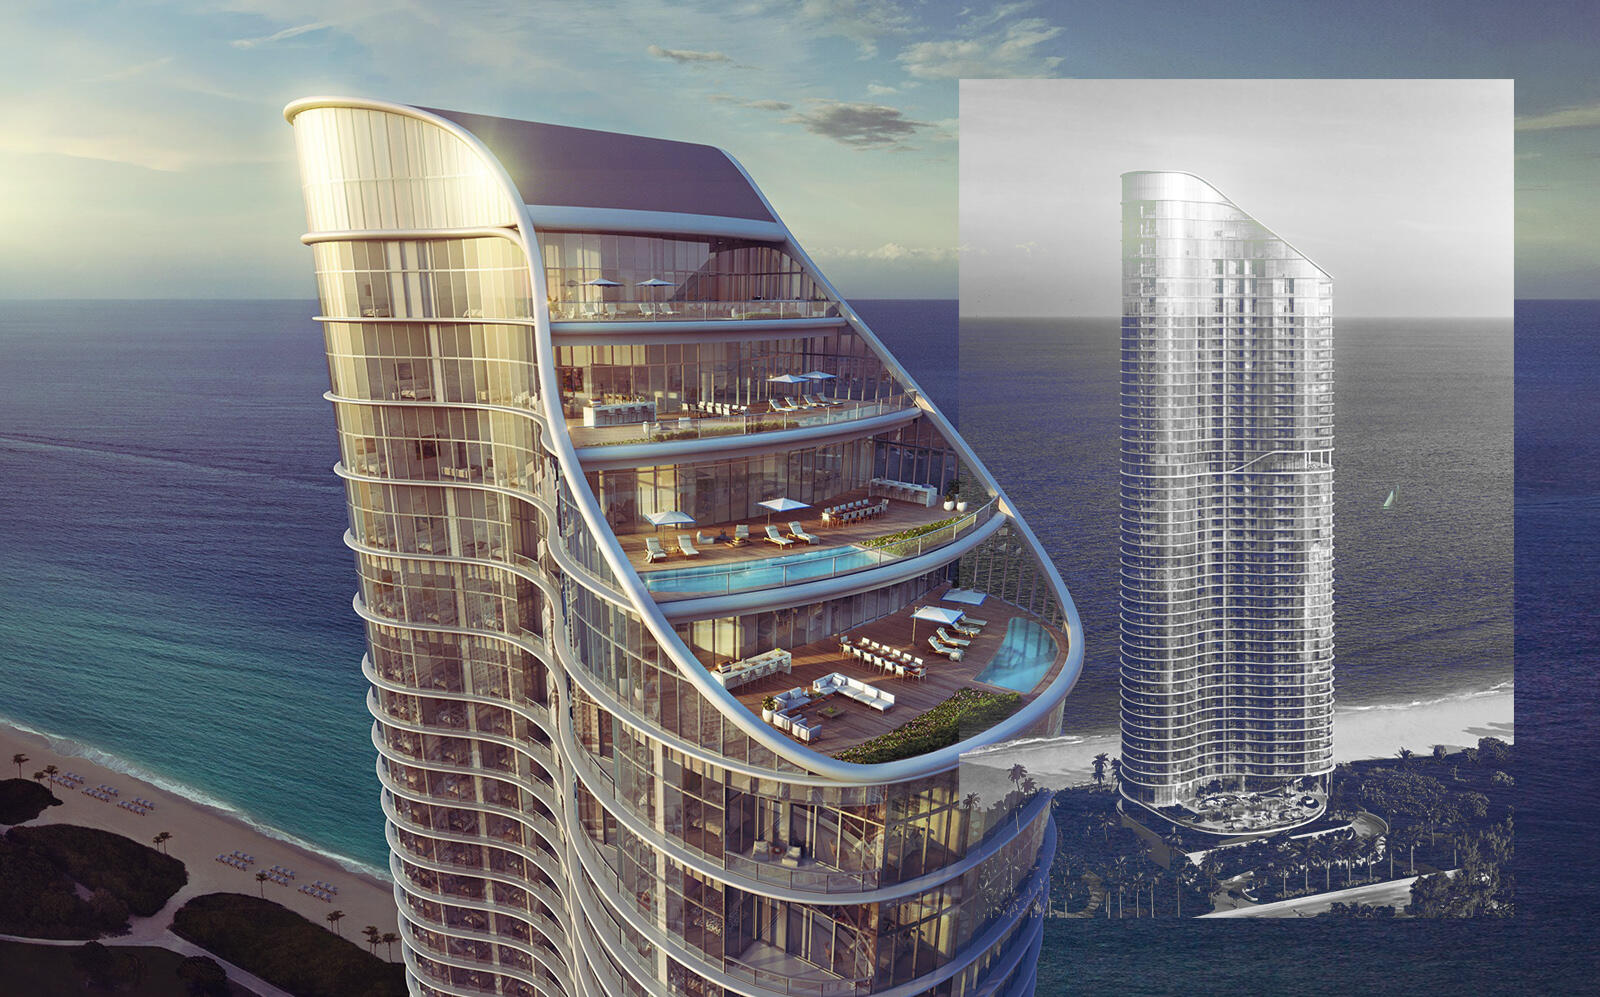 The Sunny Isles residential tower. (The Ritz-Carlton Residences)